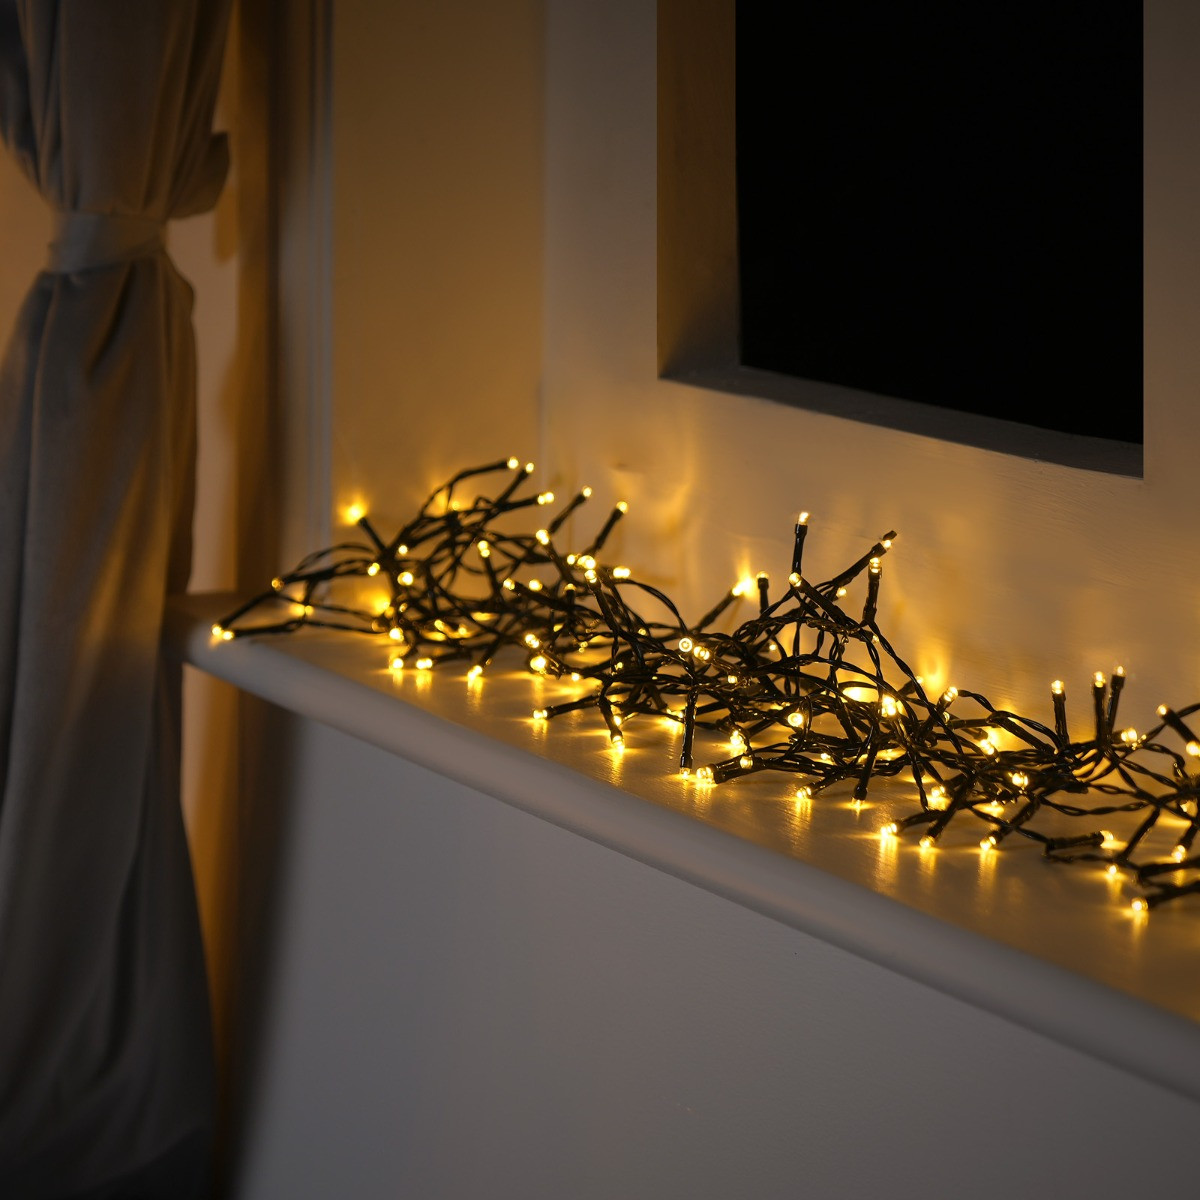 200 Indoor/Outdoor Mains Operated LED String Lights - Warm White>